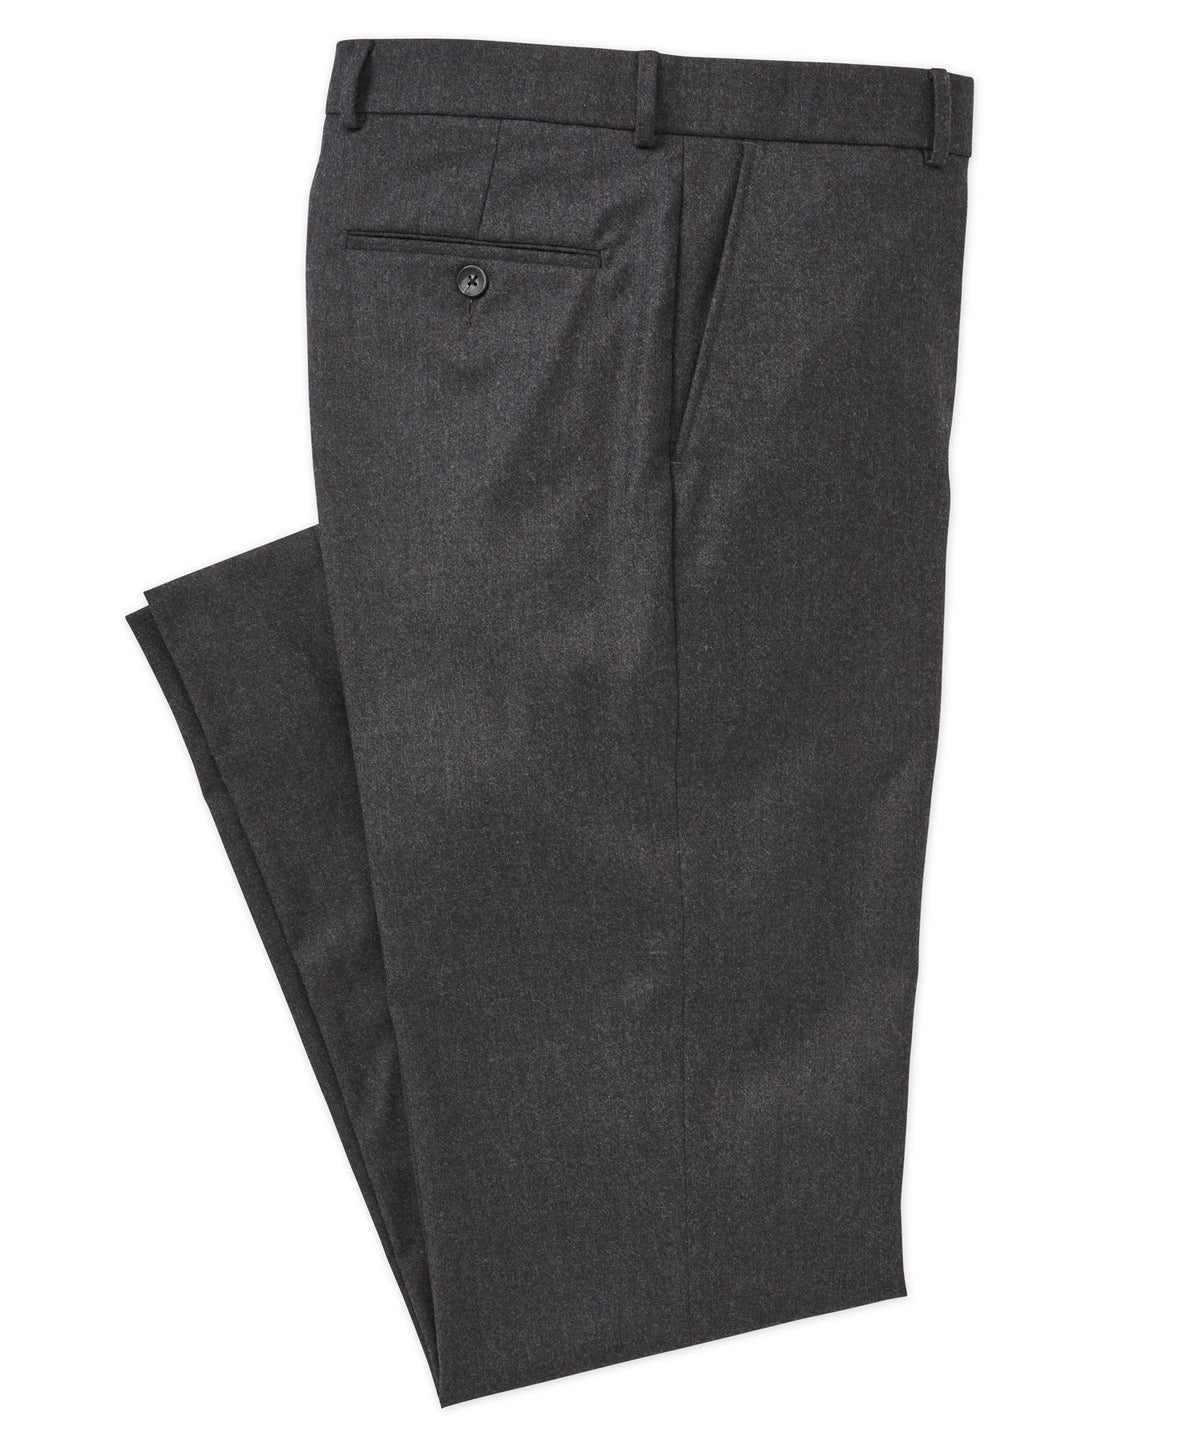 Wool-Cashmere Flannel Flat-Front Trouser